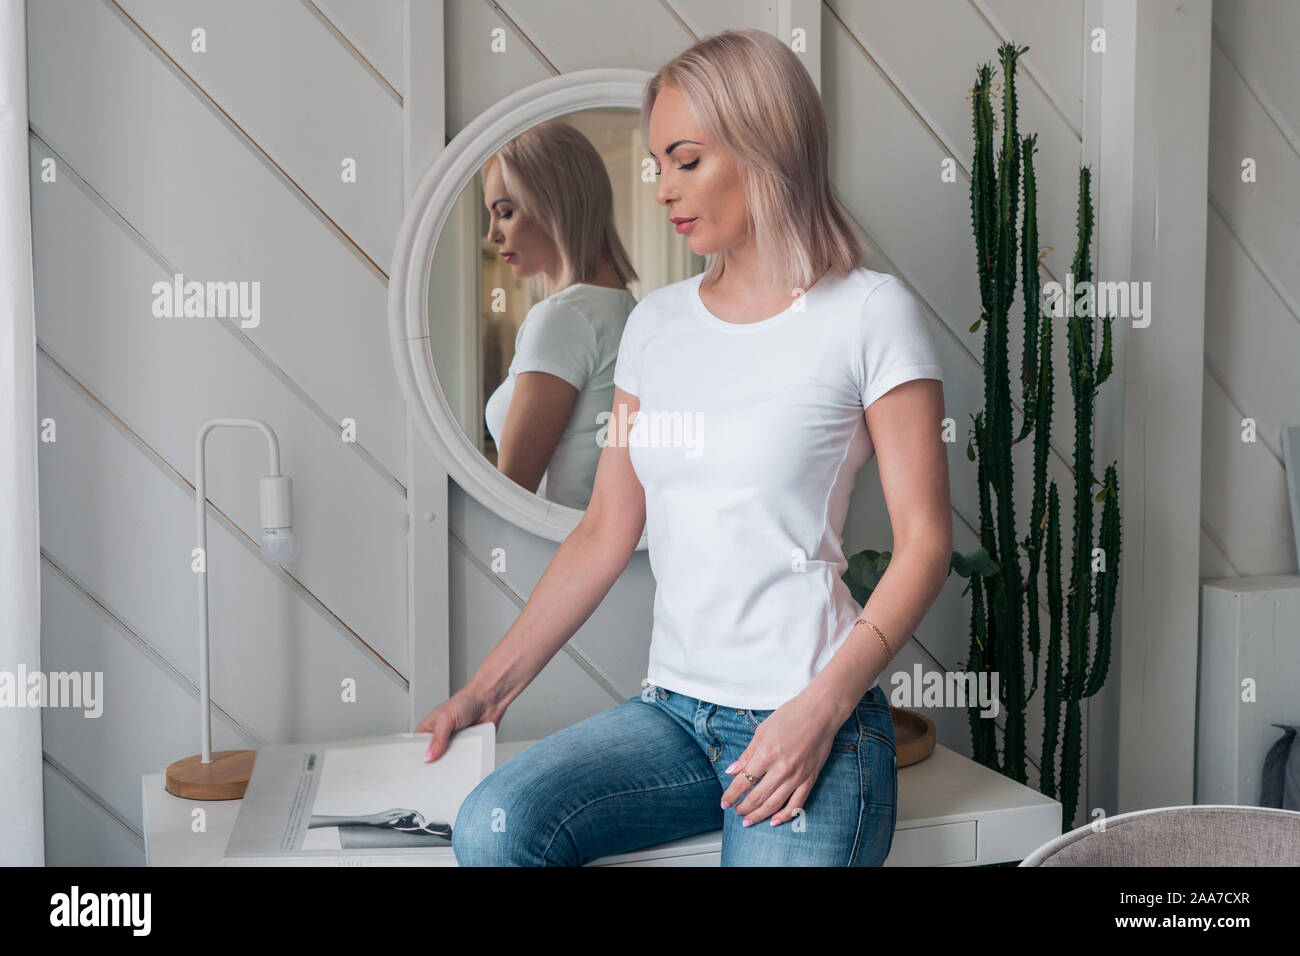 Delicate portrait of a beautiful blonde in a white t-shirt and blue jeans Stock Photo